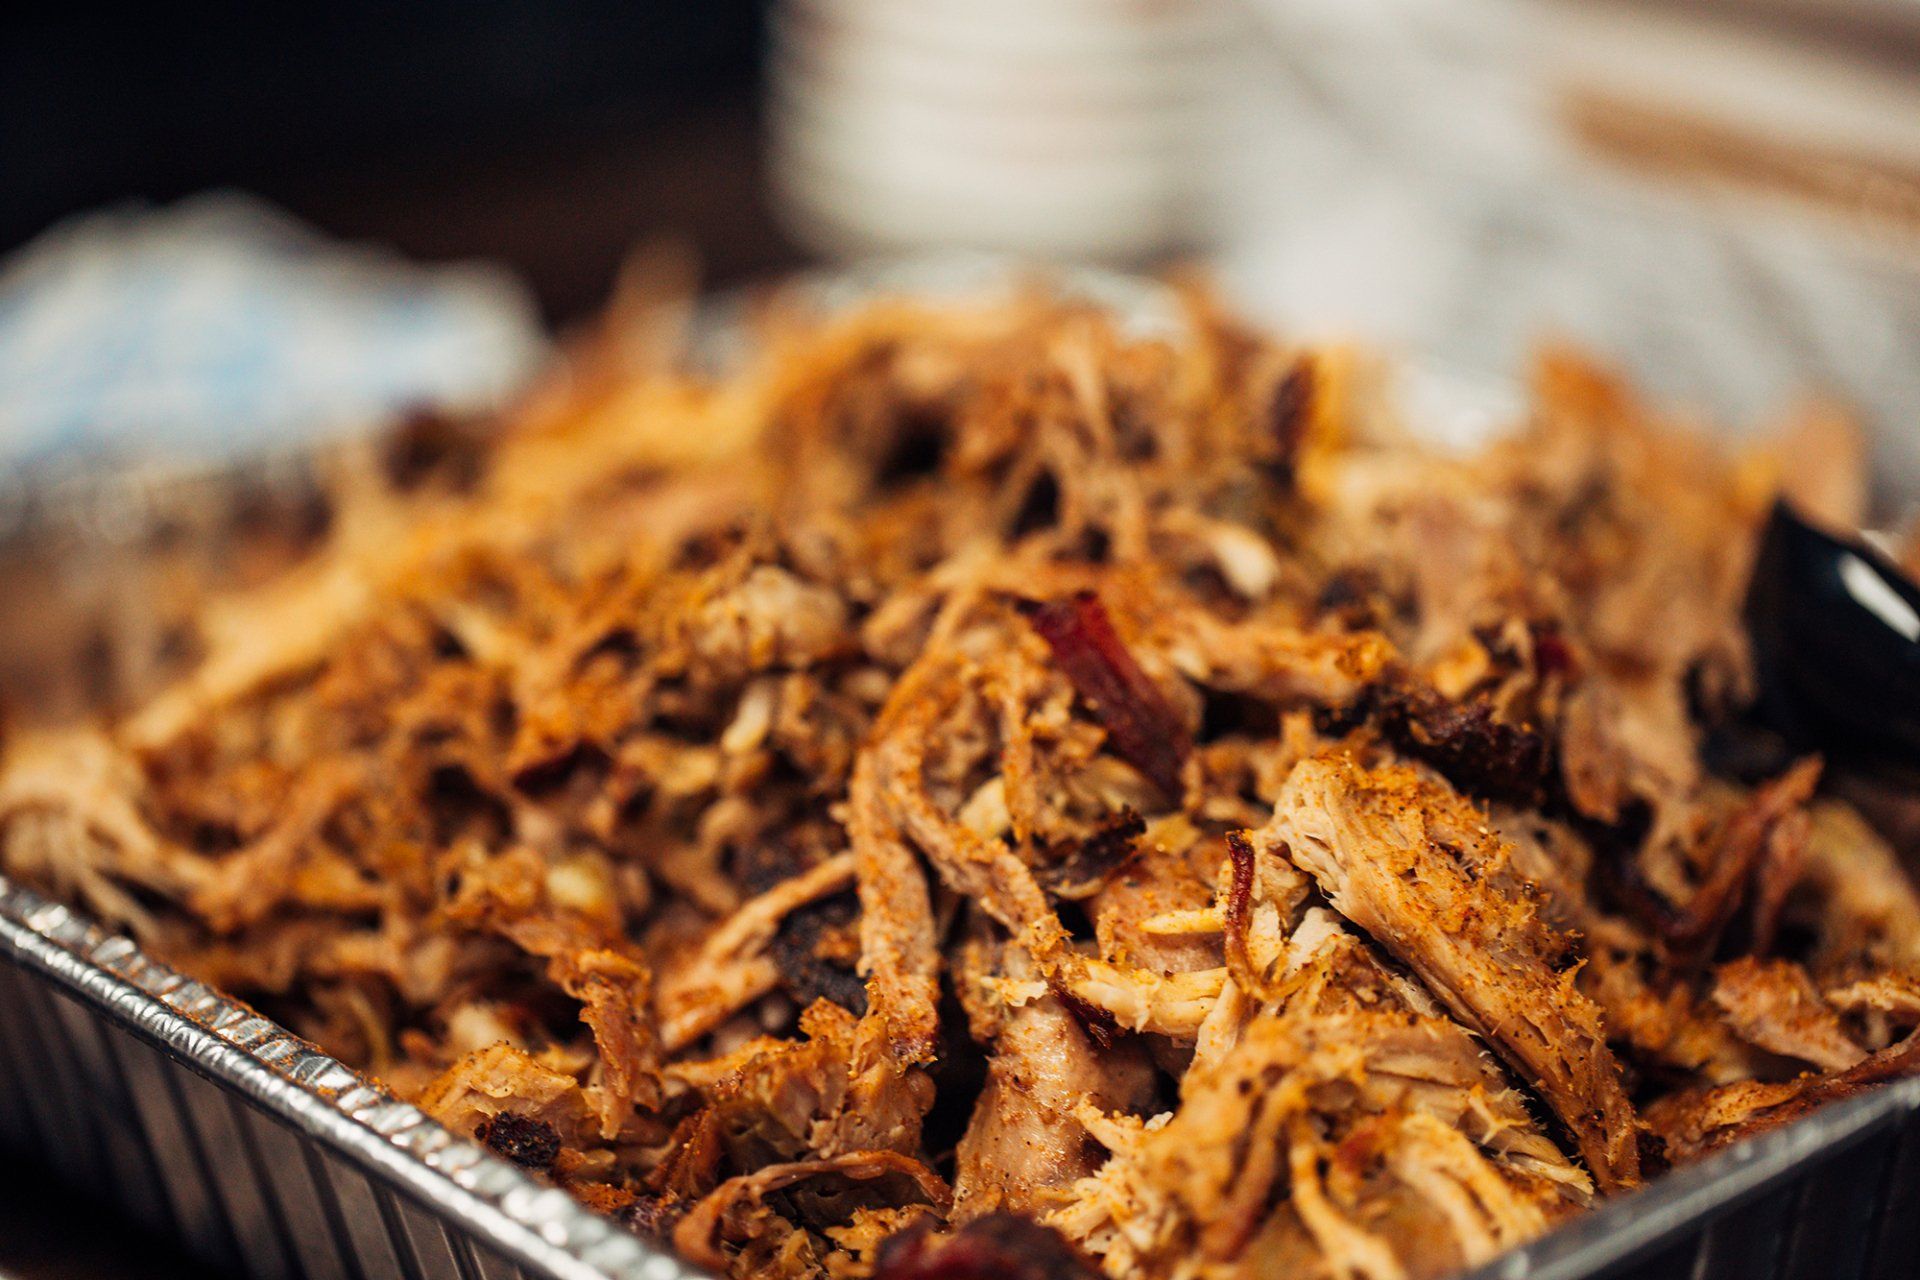 Enjoy Pork, Bicken, Brisket, & More When You Order Catering From Sweet Smoke BBQ in Jeff City, MO.